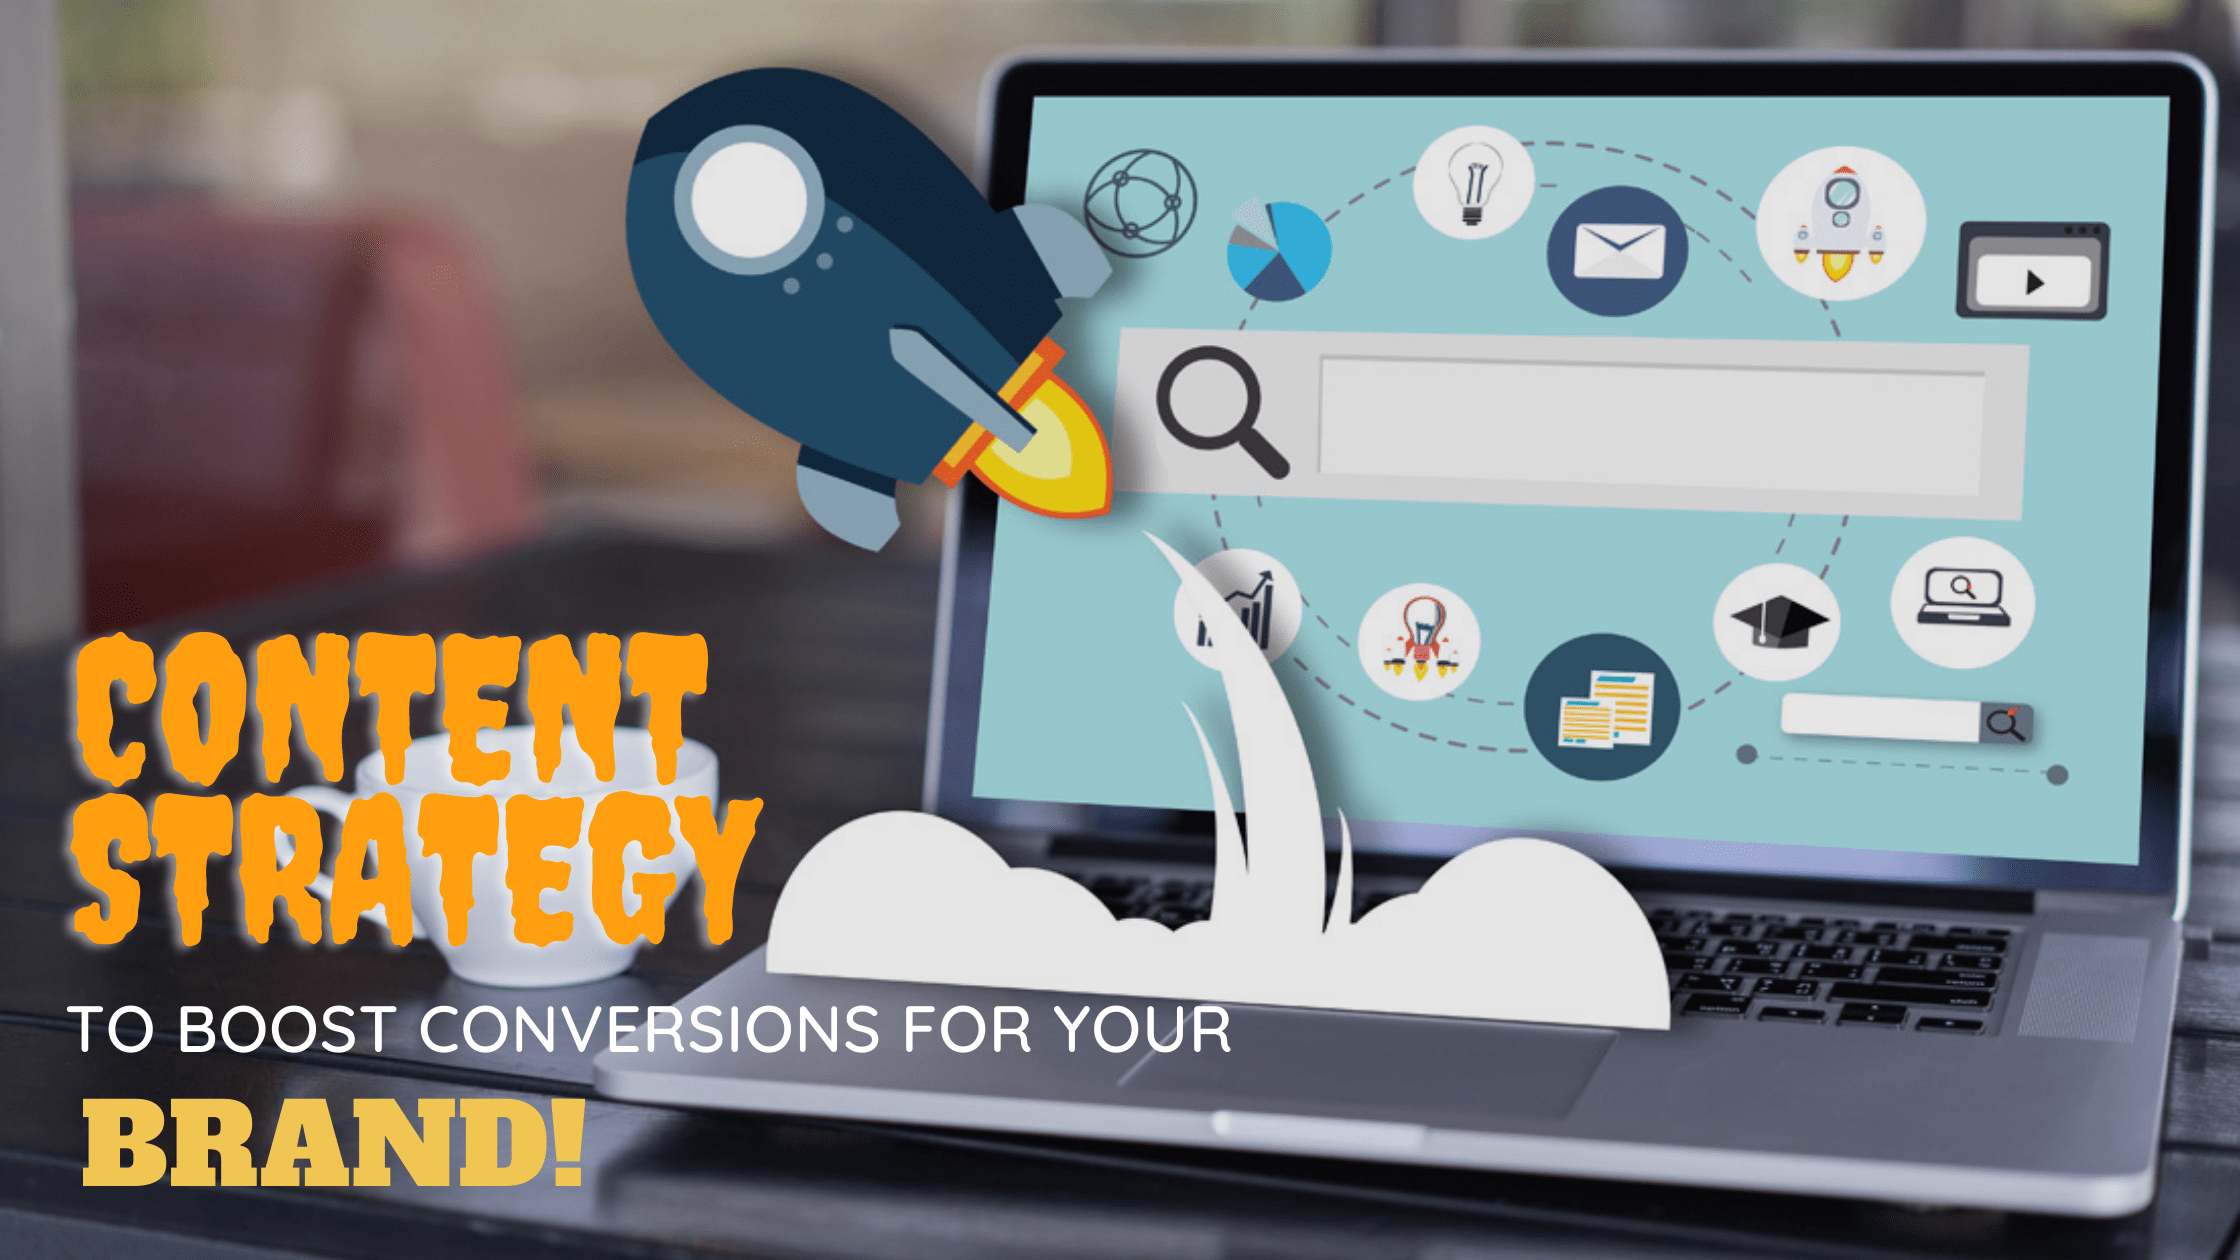 Content Strategy to Boost Conversions for Your Brand!